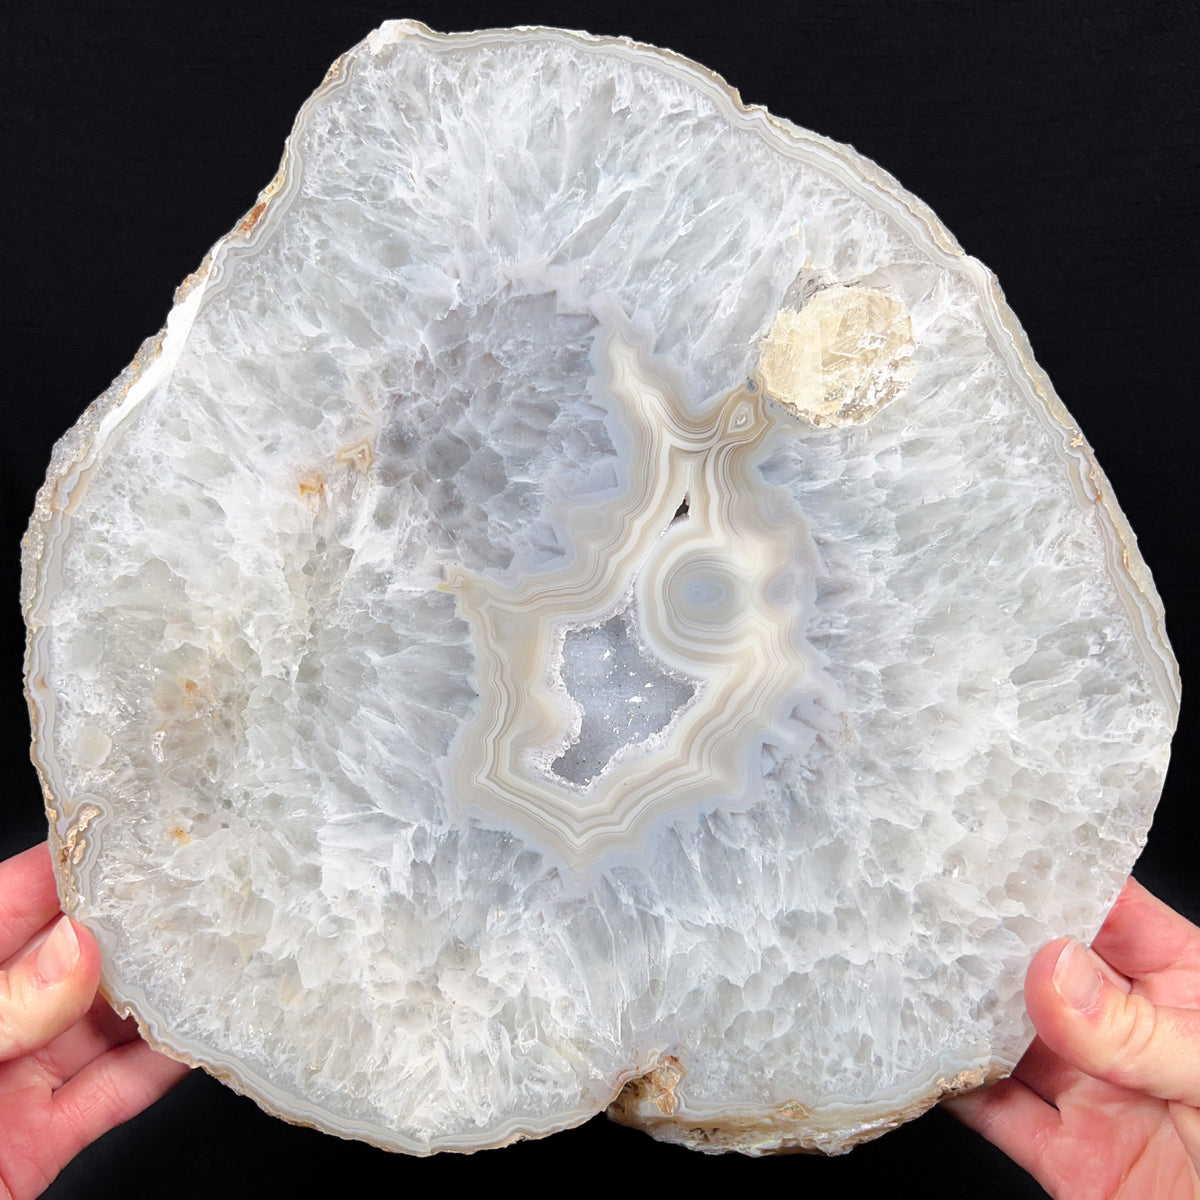 Large Drusy Quartz Geode Slice with Agate Bands